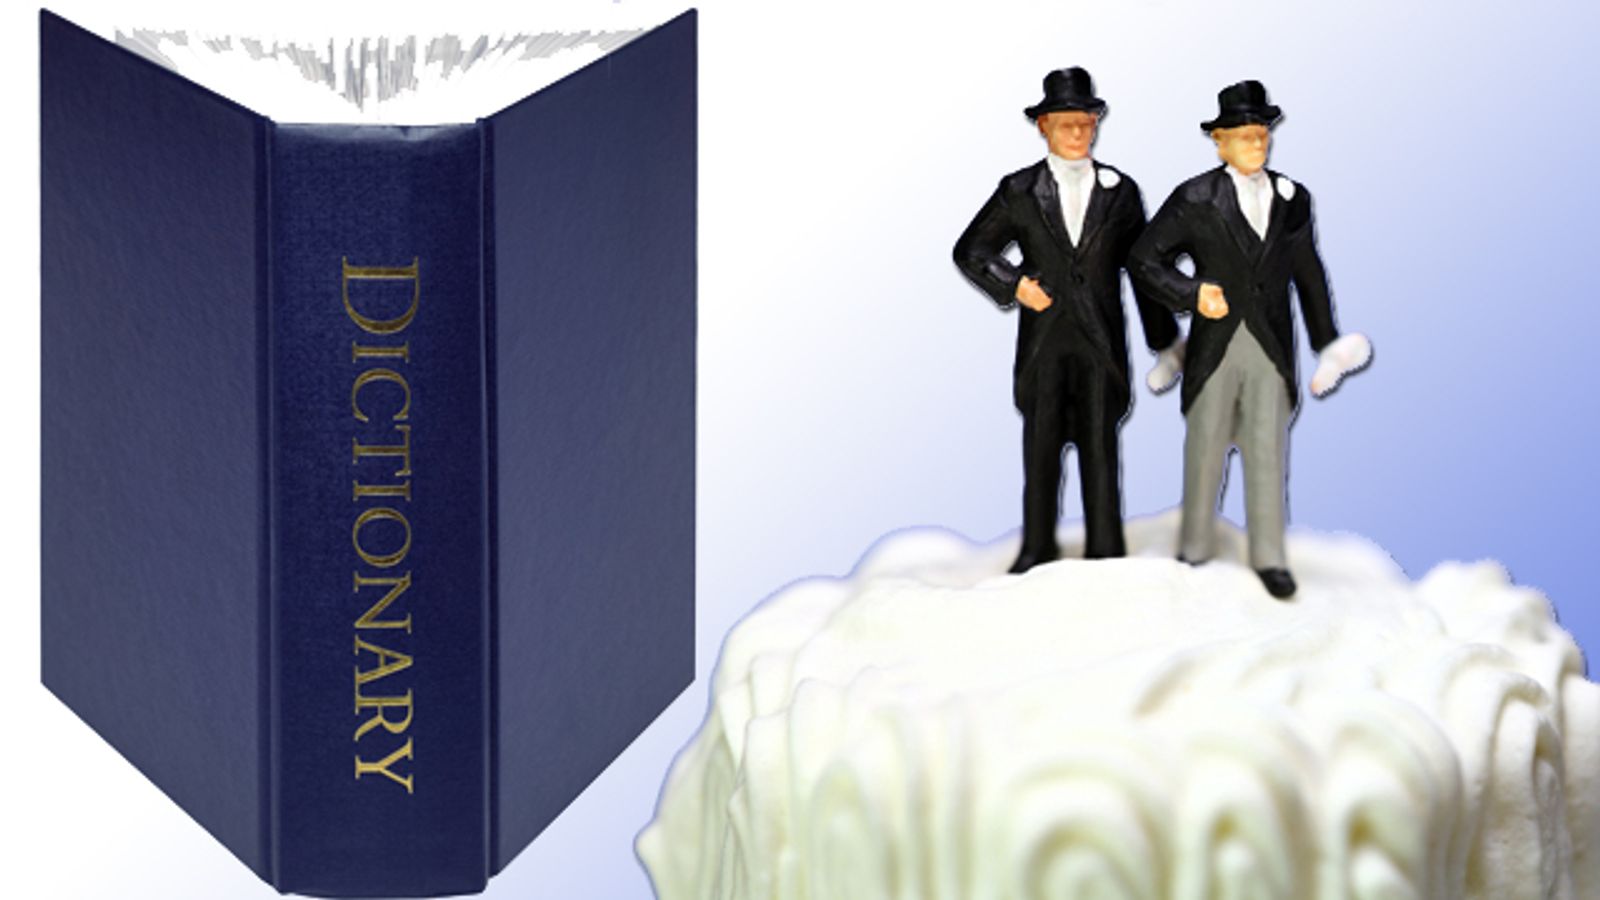 To Conservatives’ Chagrin, Dictionary Redefines Marriage